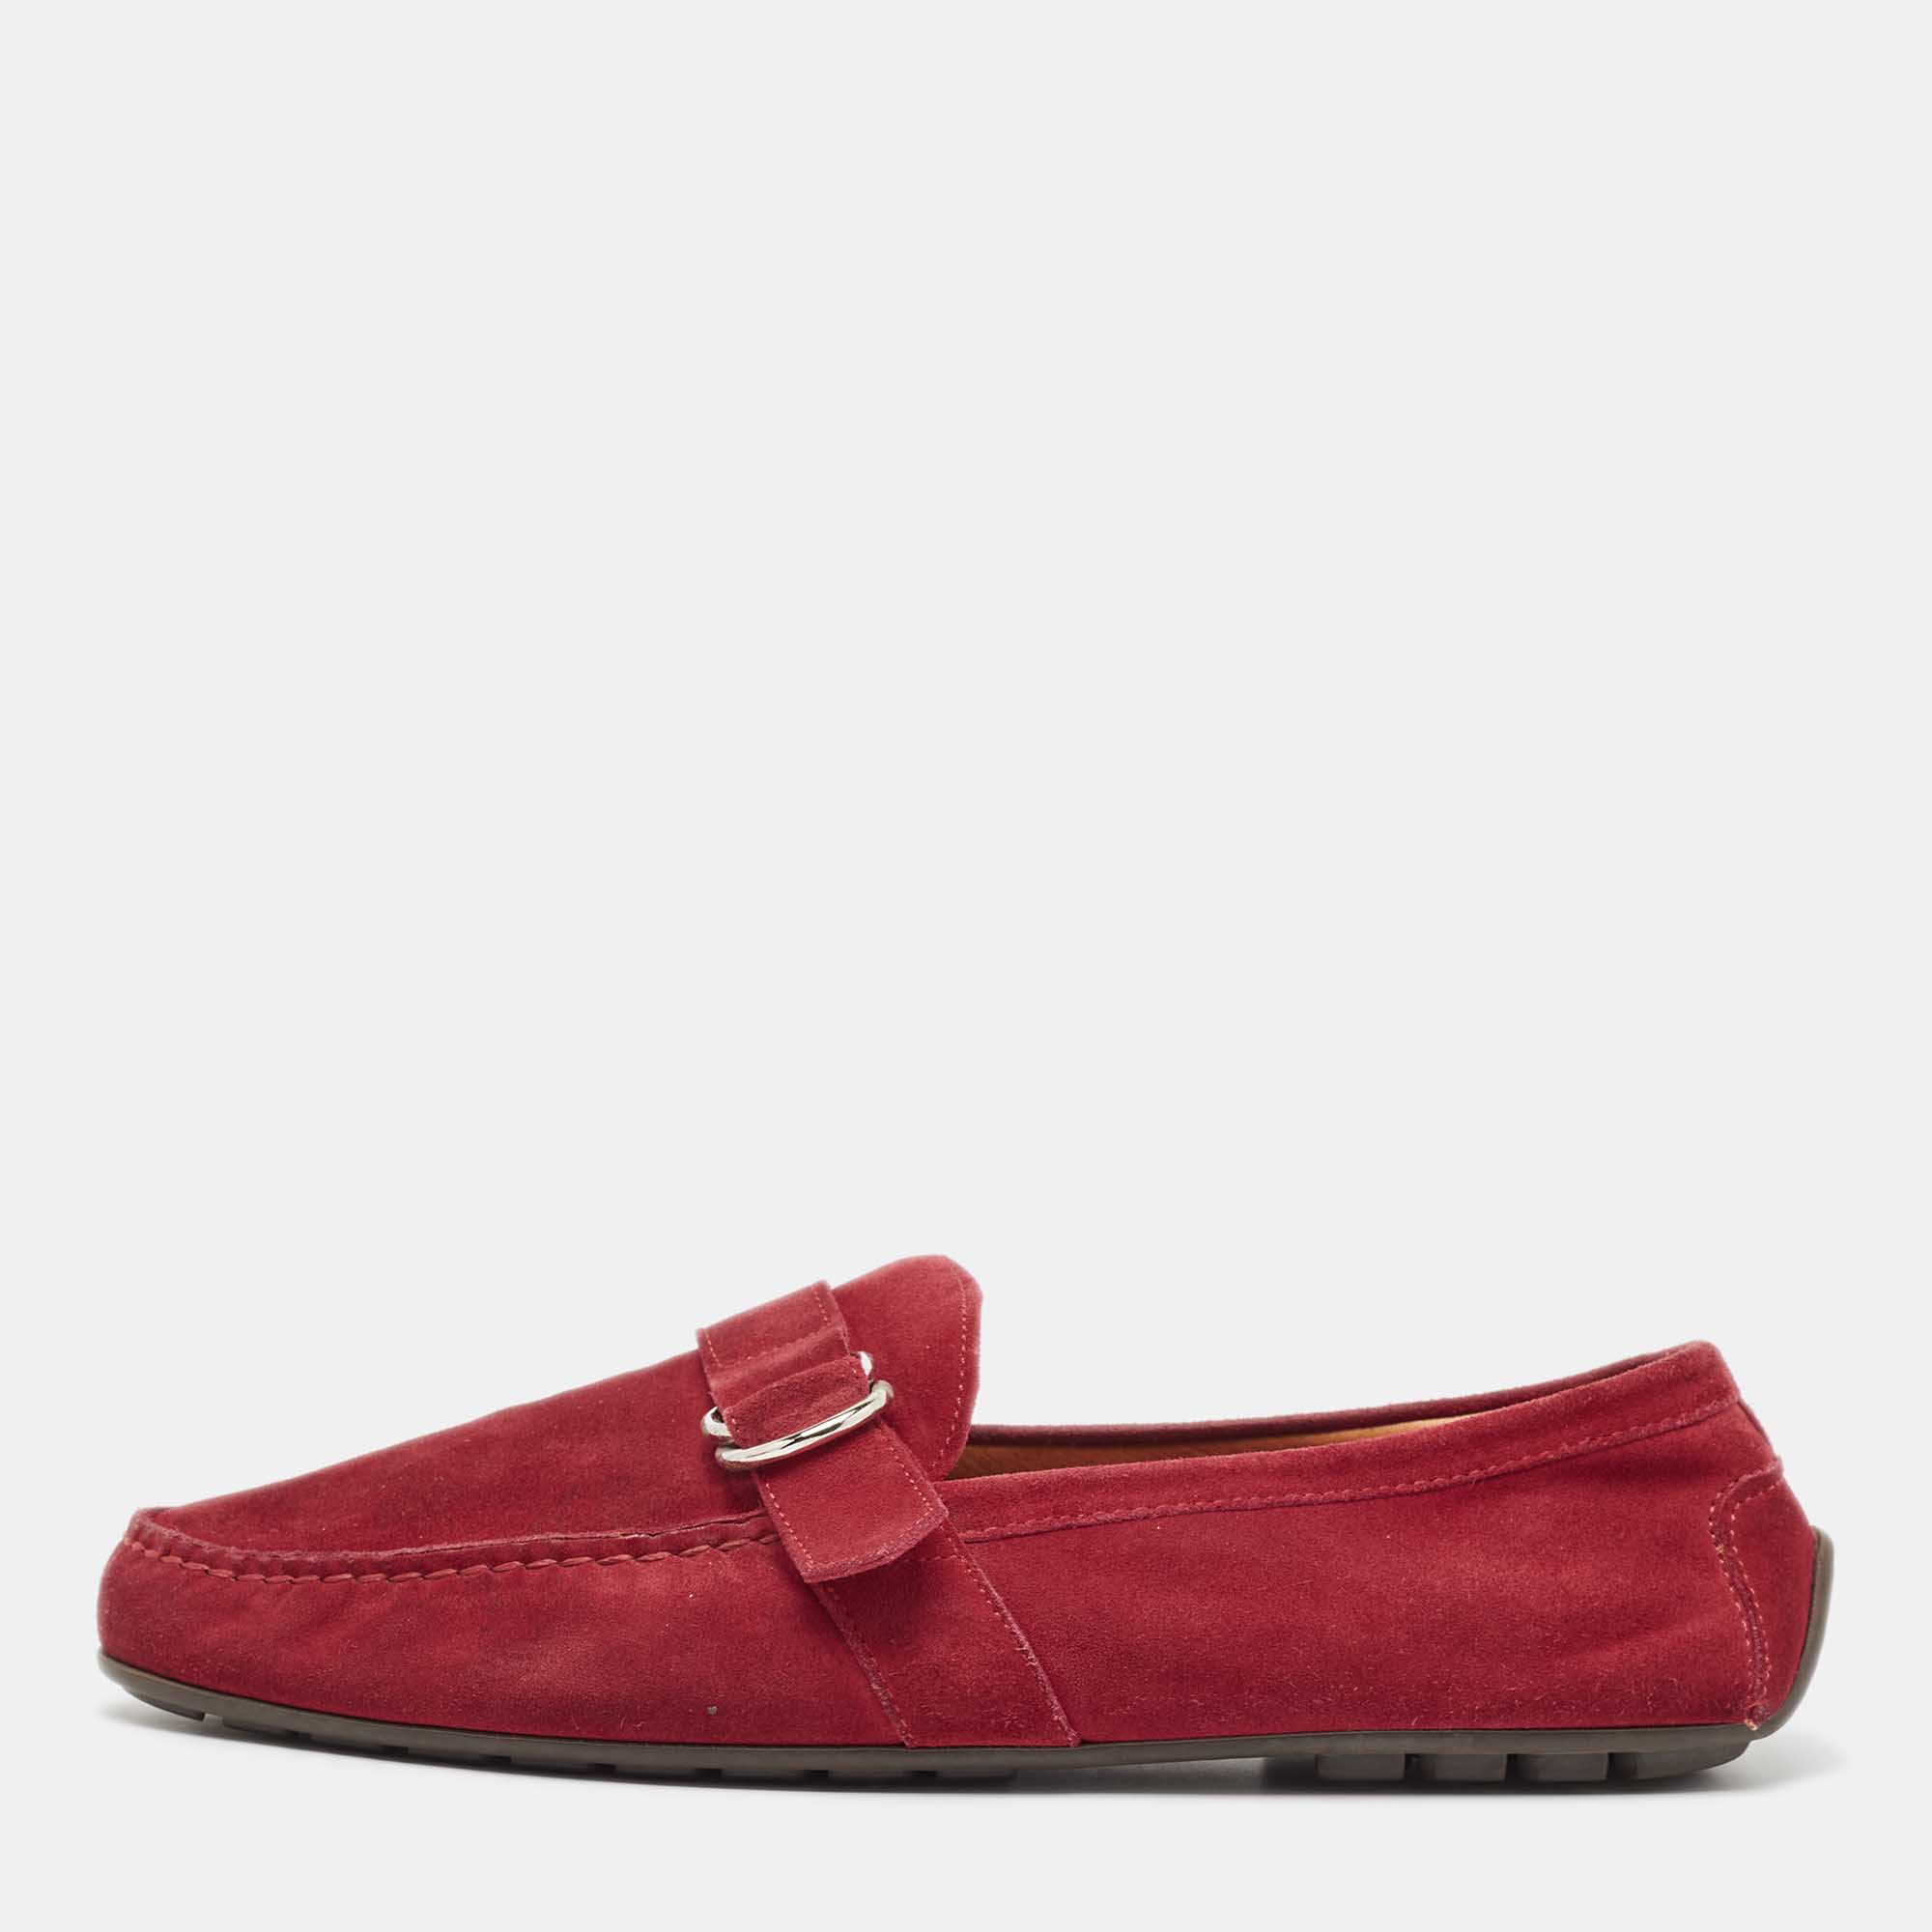 

Ralph Lauren Red Suede Buckle Driving Loafers Size 45